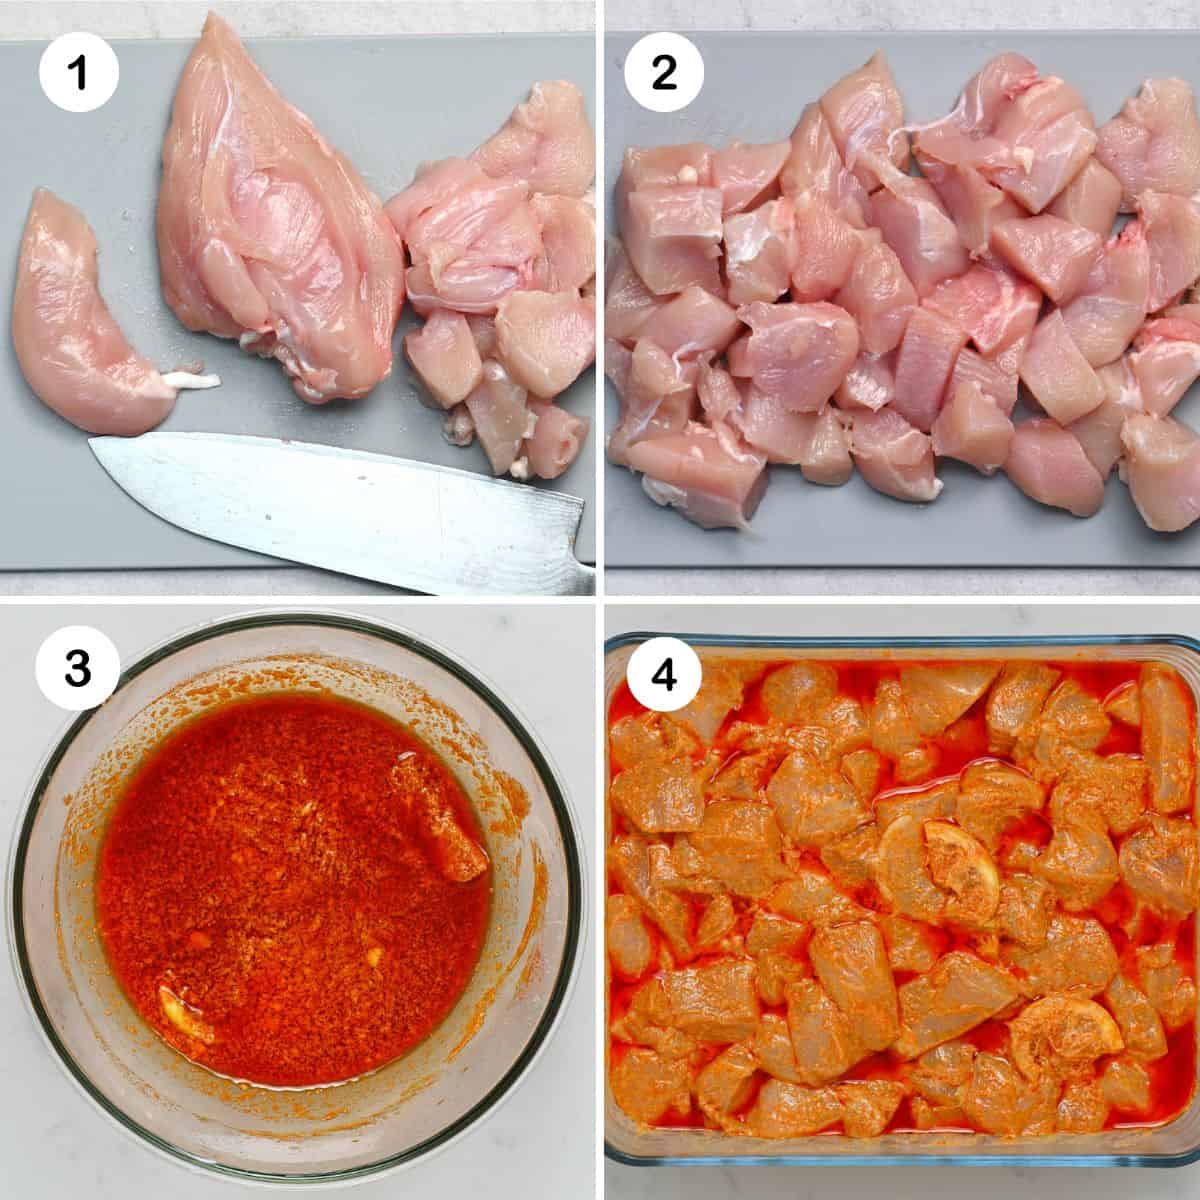 Cutting and marinating chicken breasts